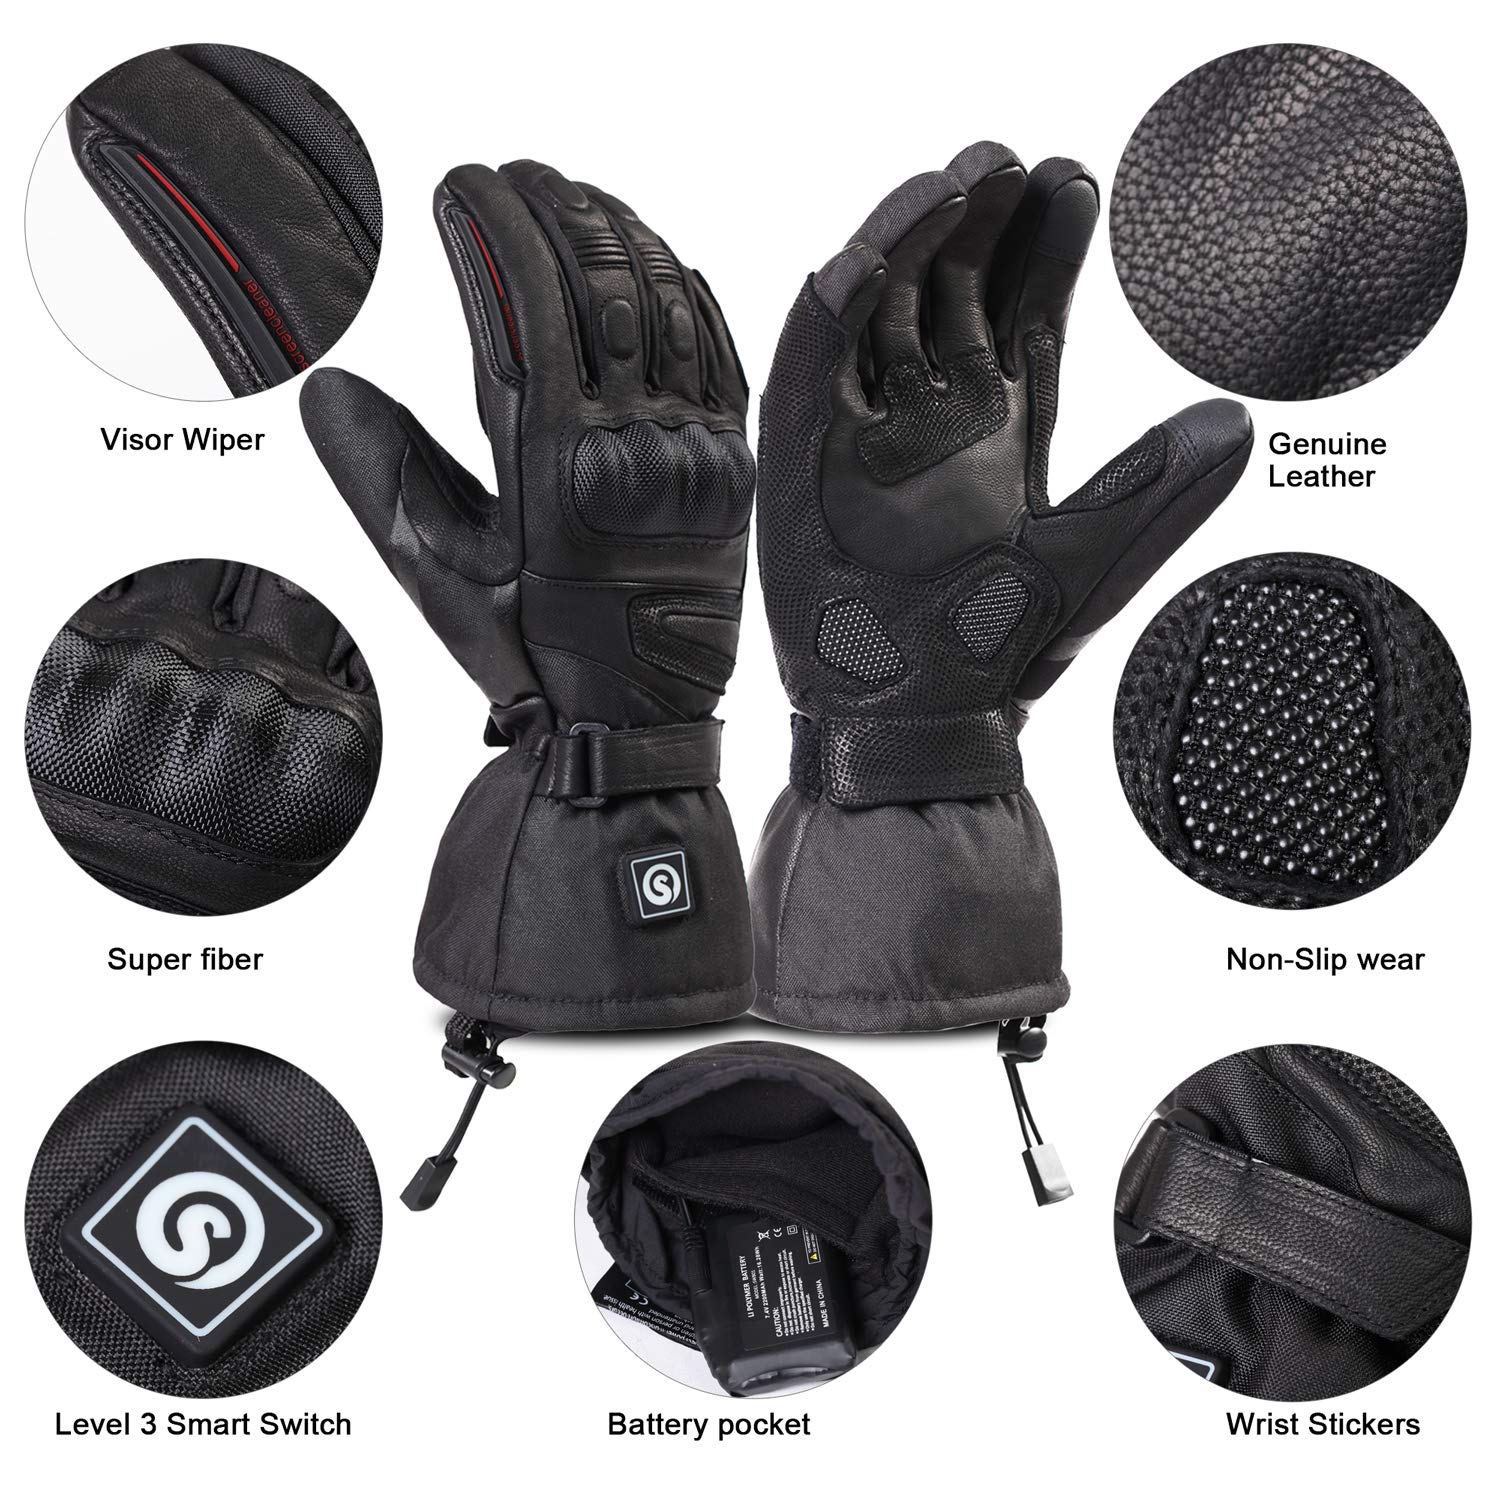 day wolf Heated Motorcycle Gloves Waterproof 7.4V 2200MAH Electric Rechargeable Battery Gloves for Winter Biking Skiing Cycling Hunting Fishing Ski Snow Men Women (M)